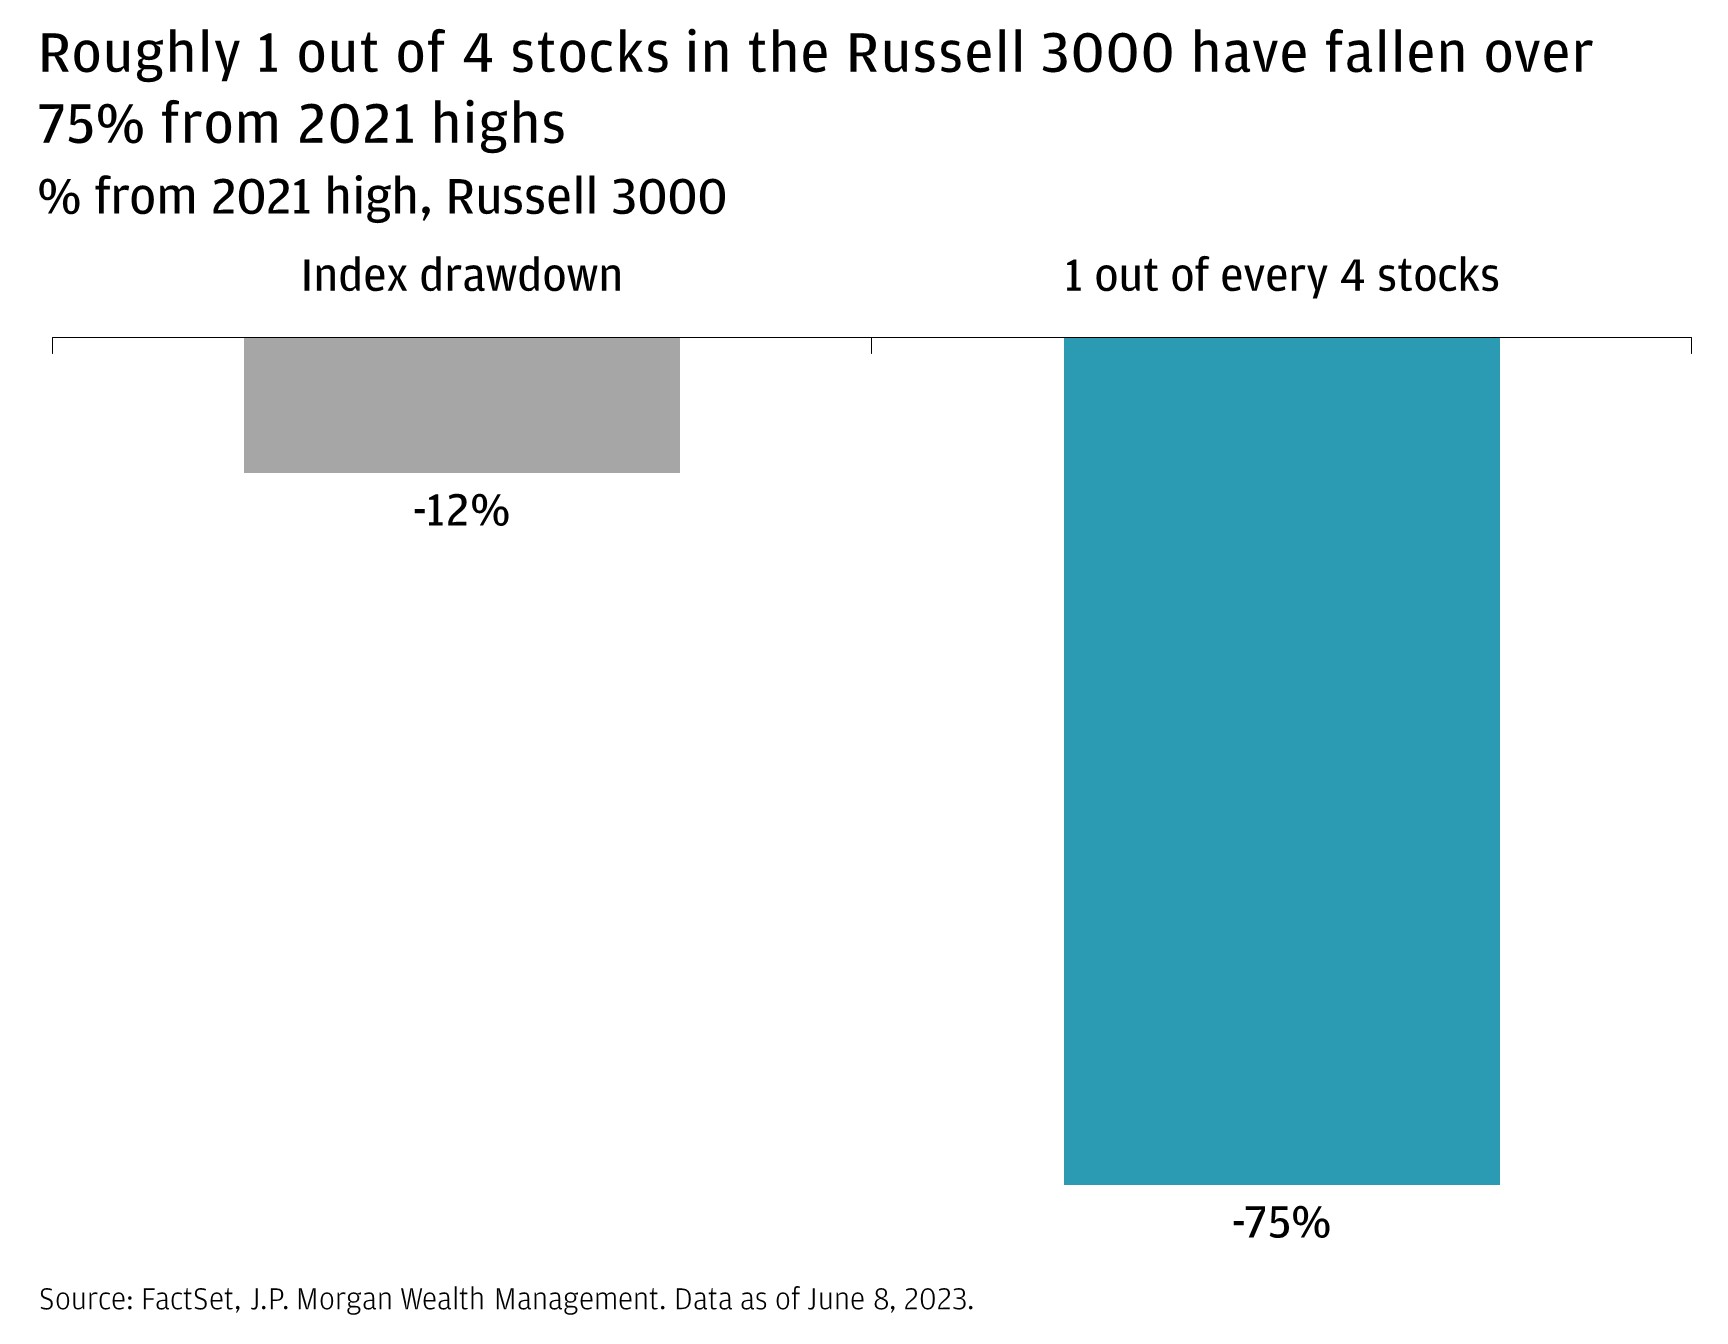 The chart describes the index drawdown of Russell 3000 and the 1 out of every 4 stocks drawdown of Russell 3000 from the 2021 high. 